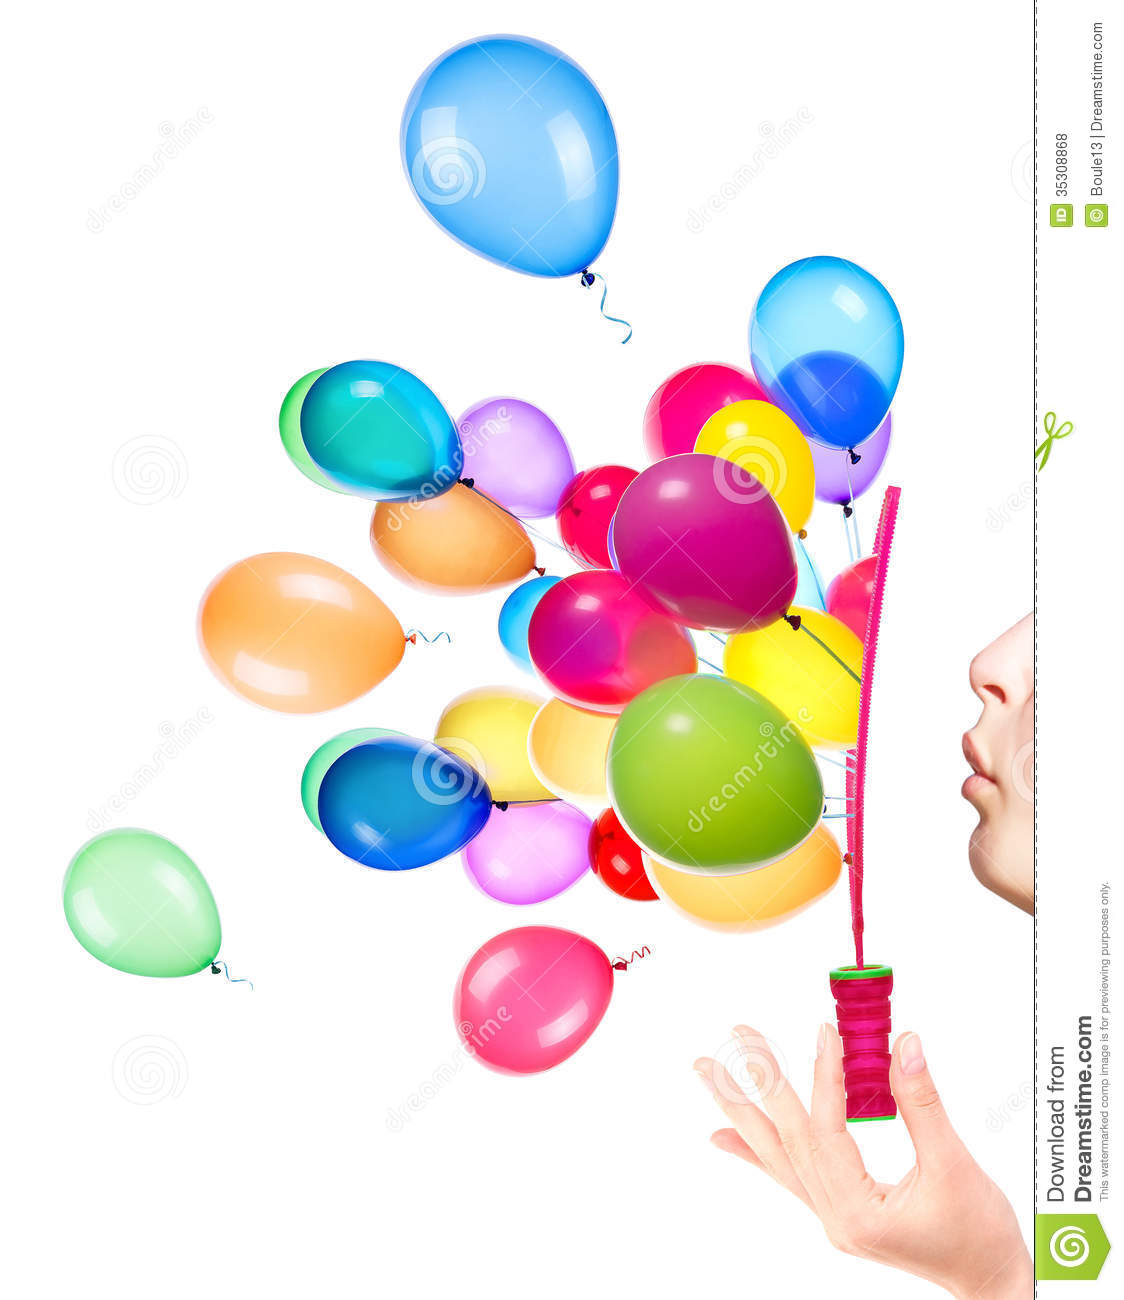 Bubble Wand Clip Art Bubble Wand Flying Balloons White Background